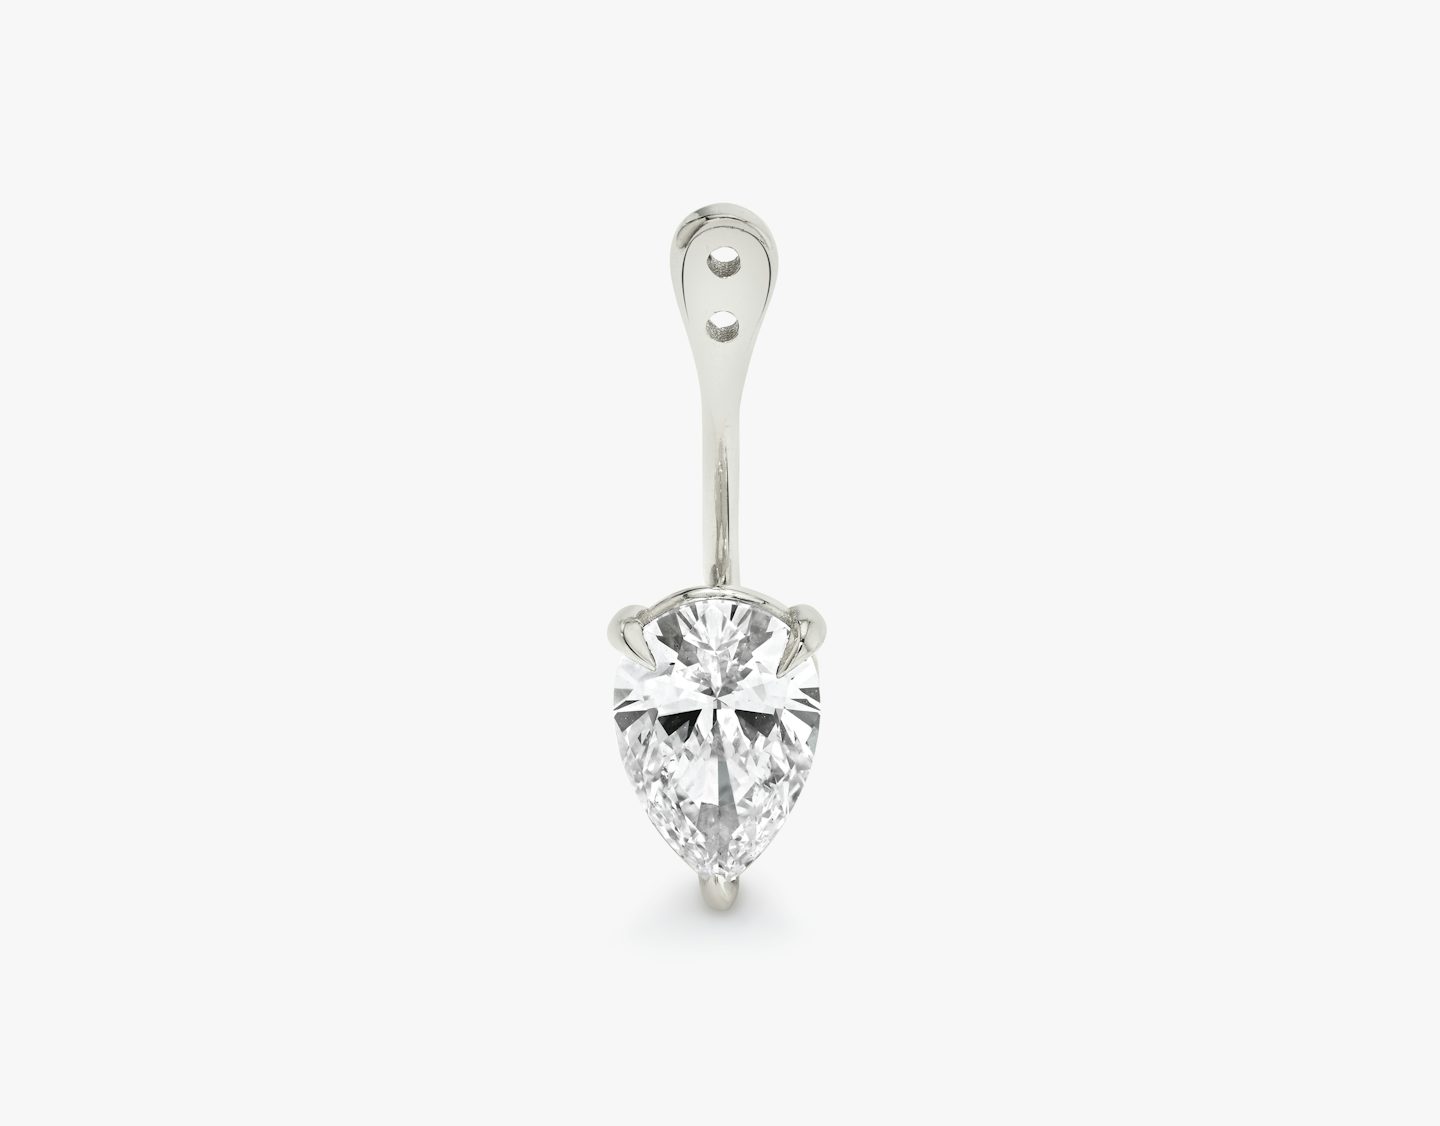 VRAI Solitaire Drop Ear Jacket | Pear | 14k | 18k White Gold | Carat weight: 1